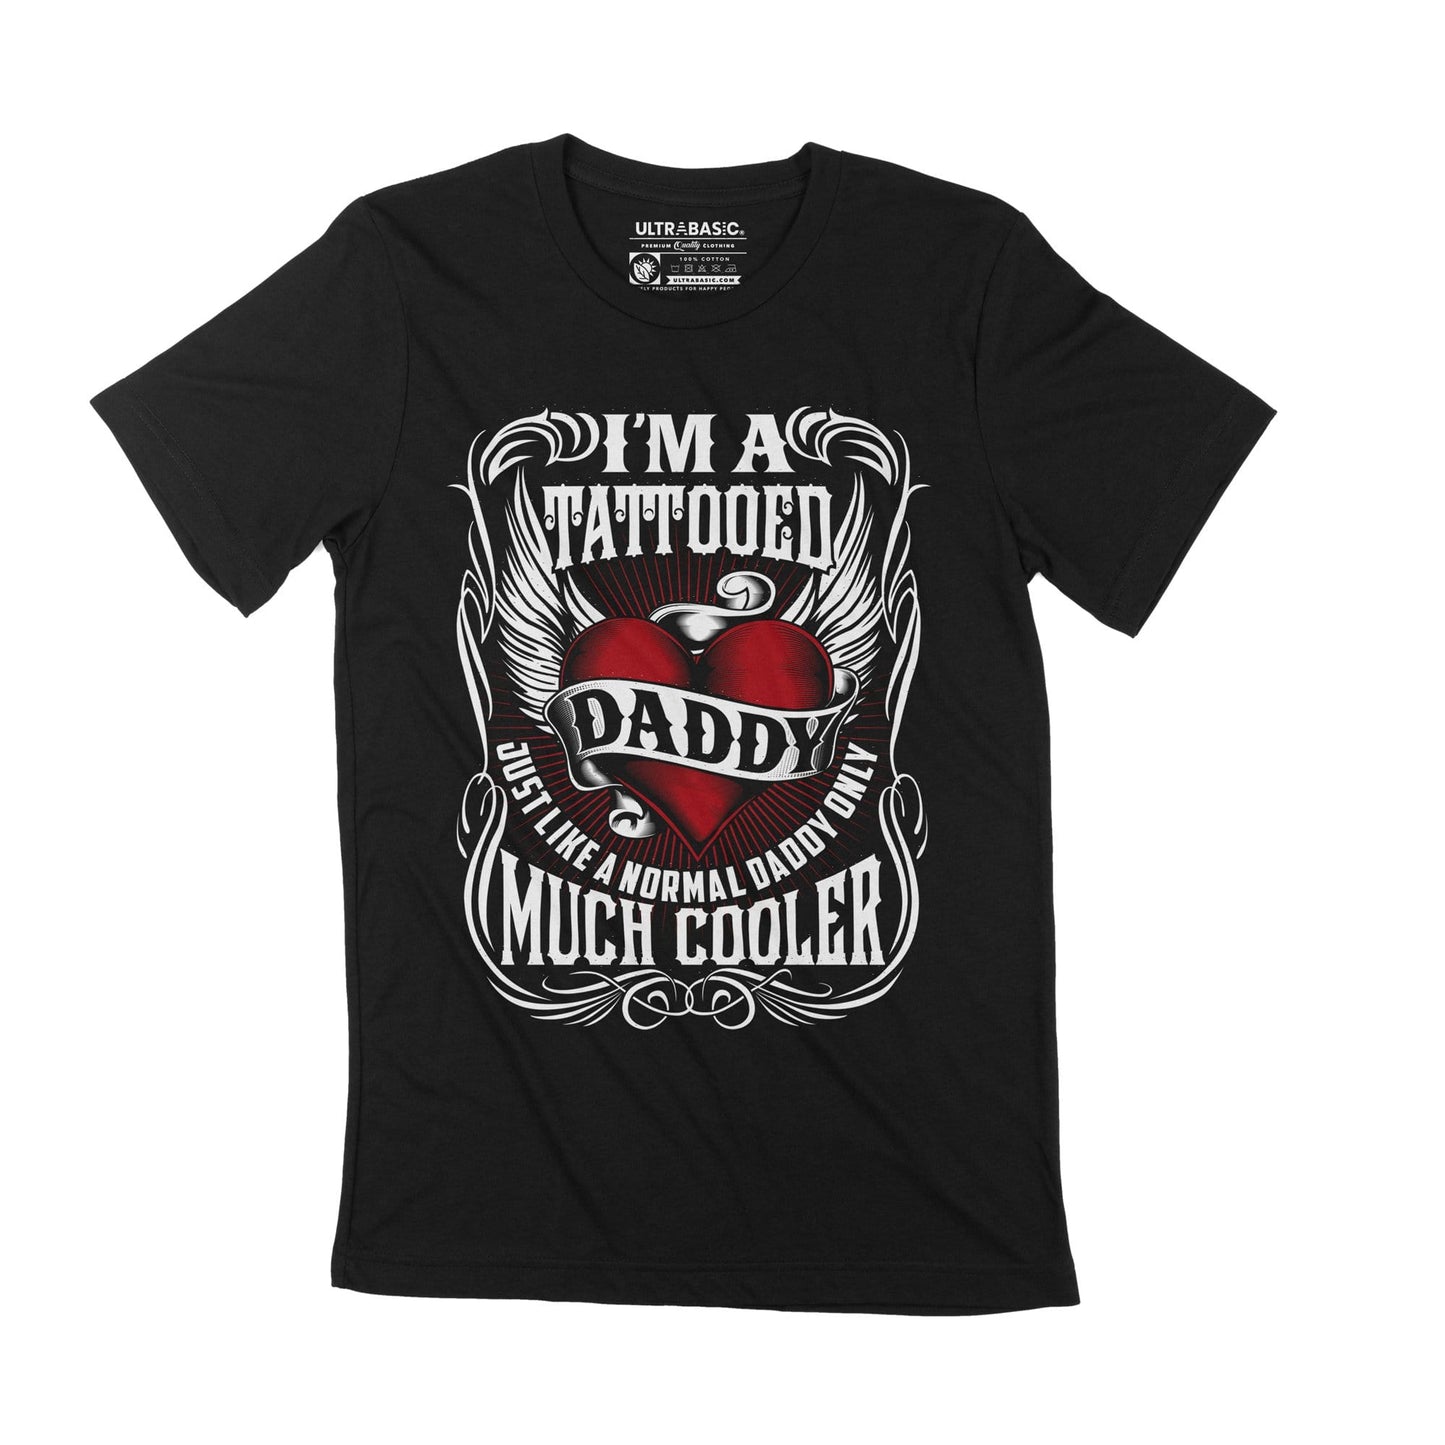 ULTRABASIC Men's T-Shirt I'm Tatooed Daddy Much Cooler Father's Day Casual Vintage Gift